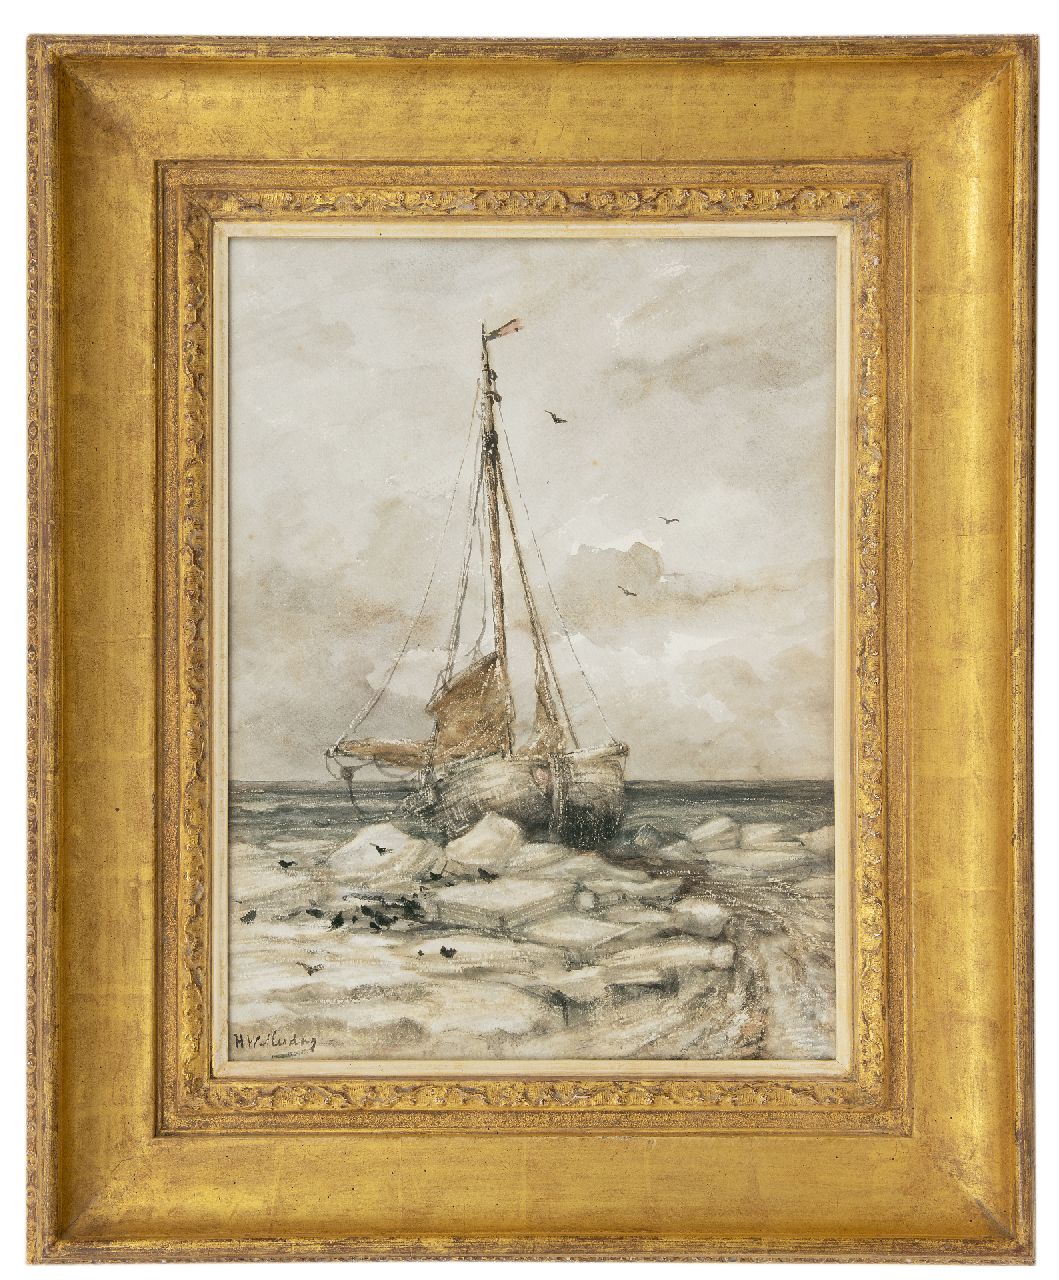 Mesdag H.W.  | Hendrik Willem Mesdag, Fishing boat on the beach between ice floes, watercolour on paper 53.0 x 39.7 cm, signed l.l. and painted ca. 1891